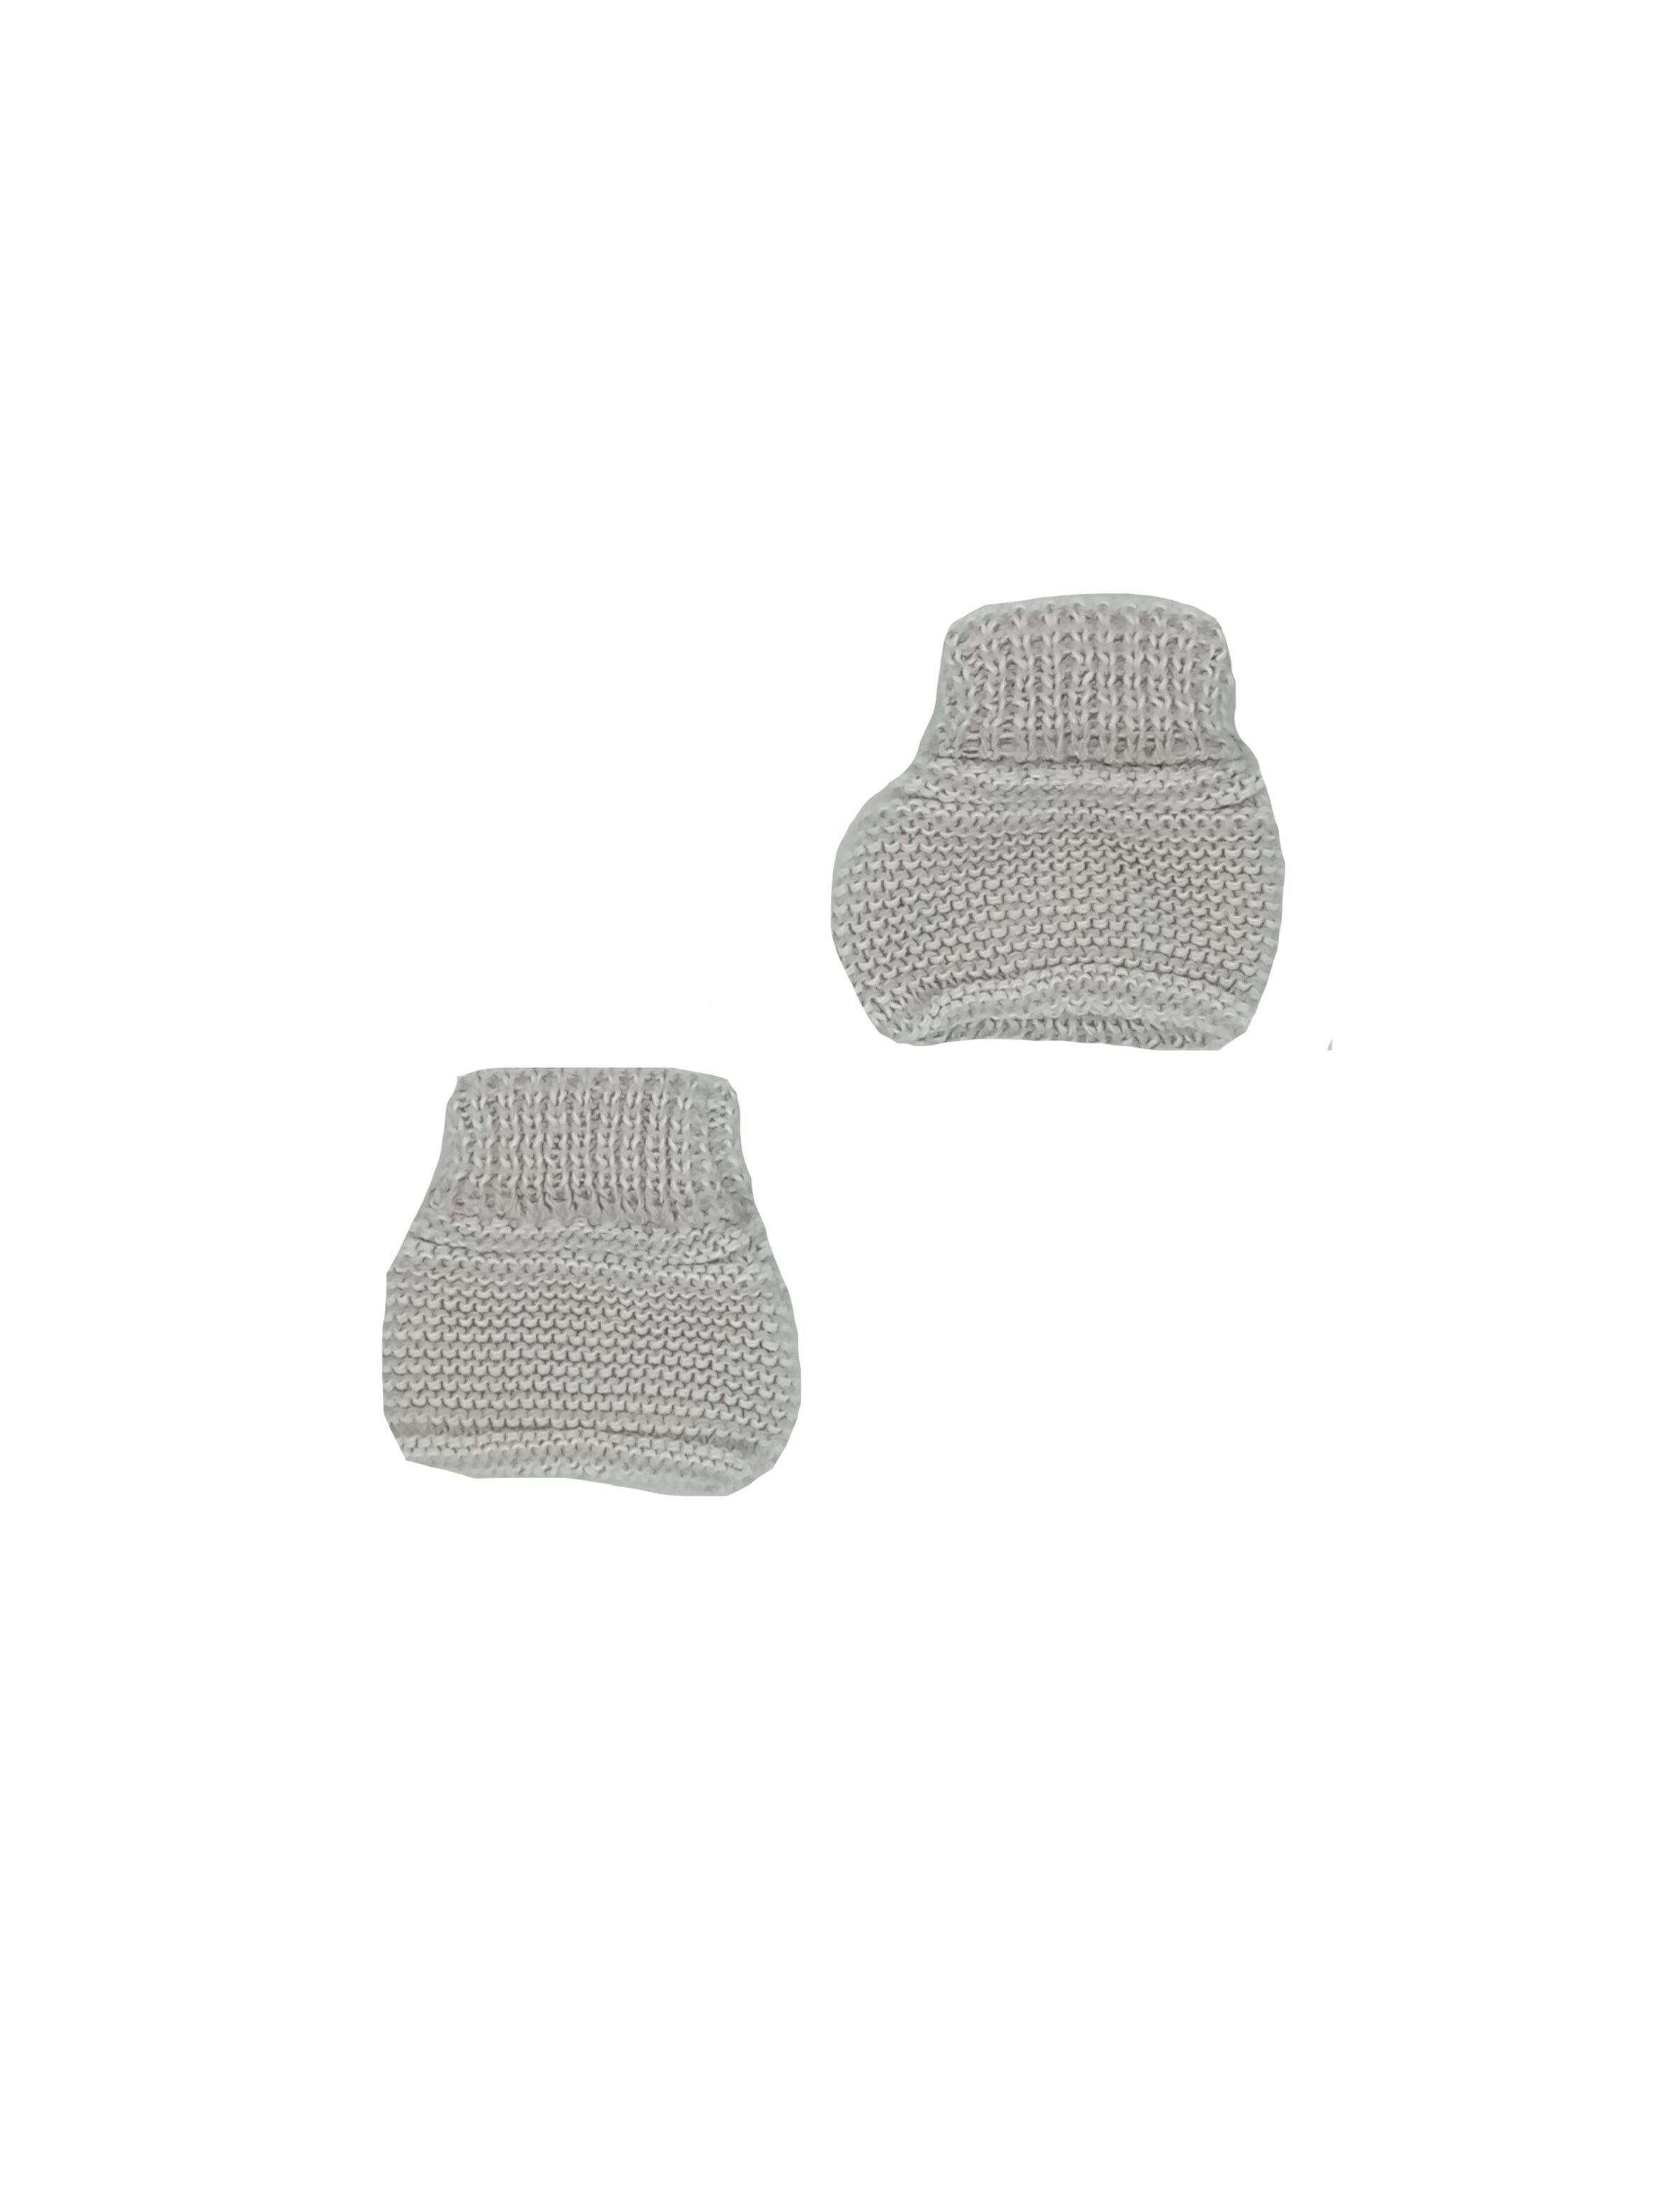 Grey Knitted Booties Booties La Manufacture de Layette 